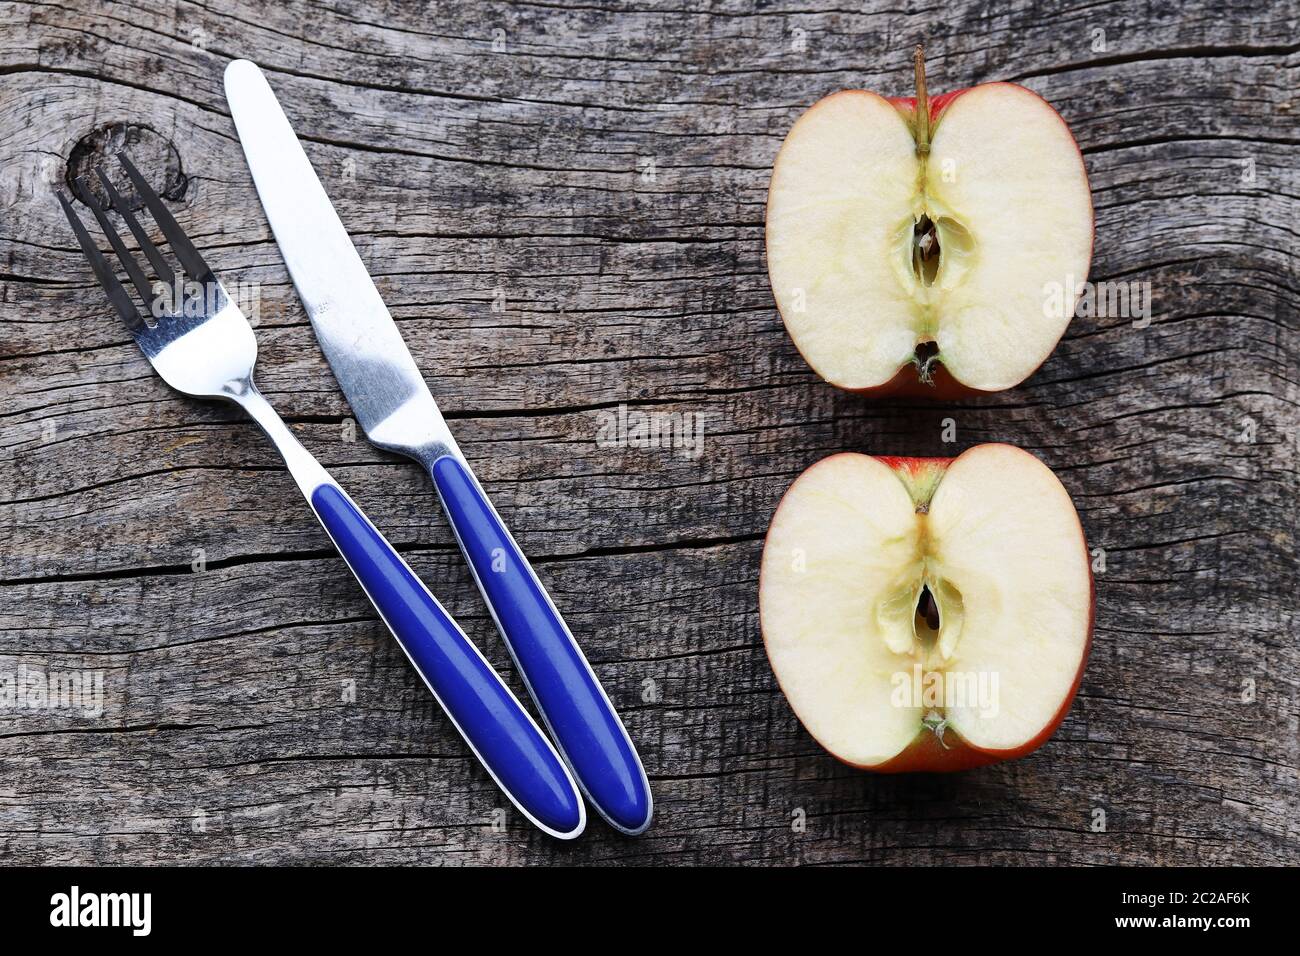 Two half apples and knife and fork on an old wooden table Stock Photo